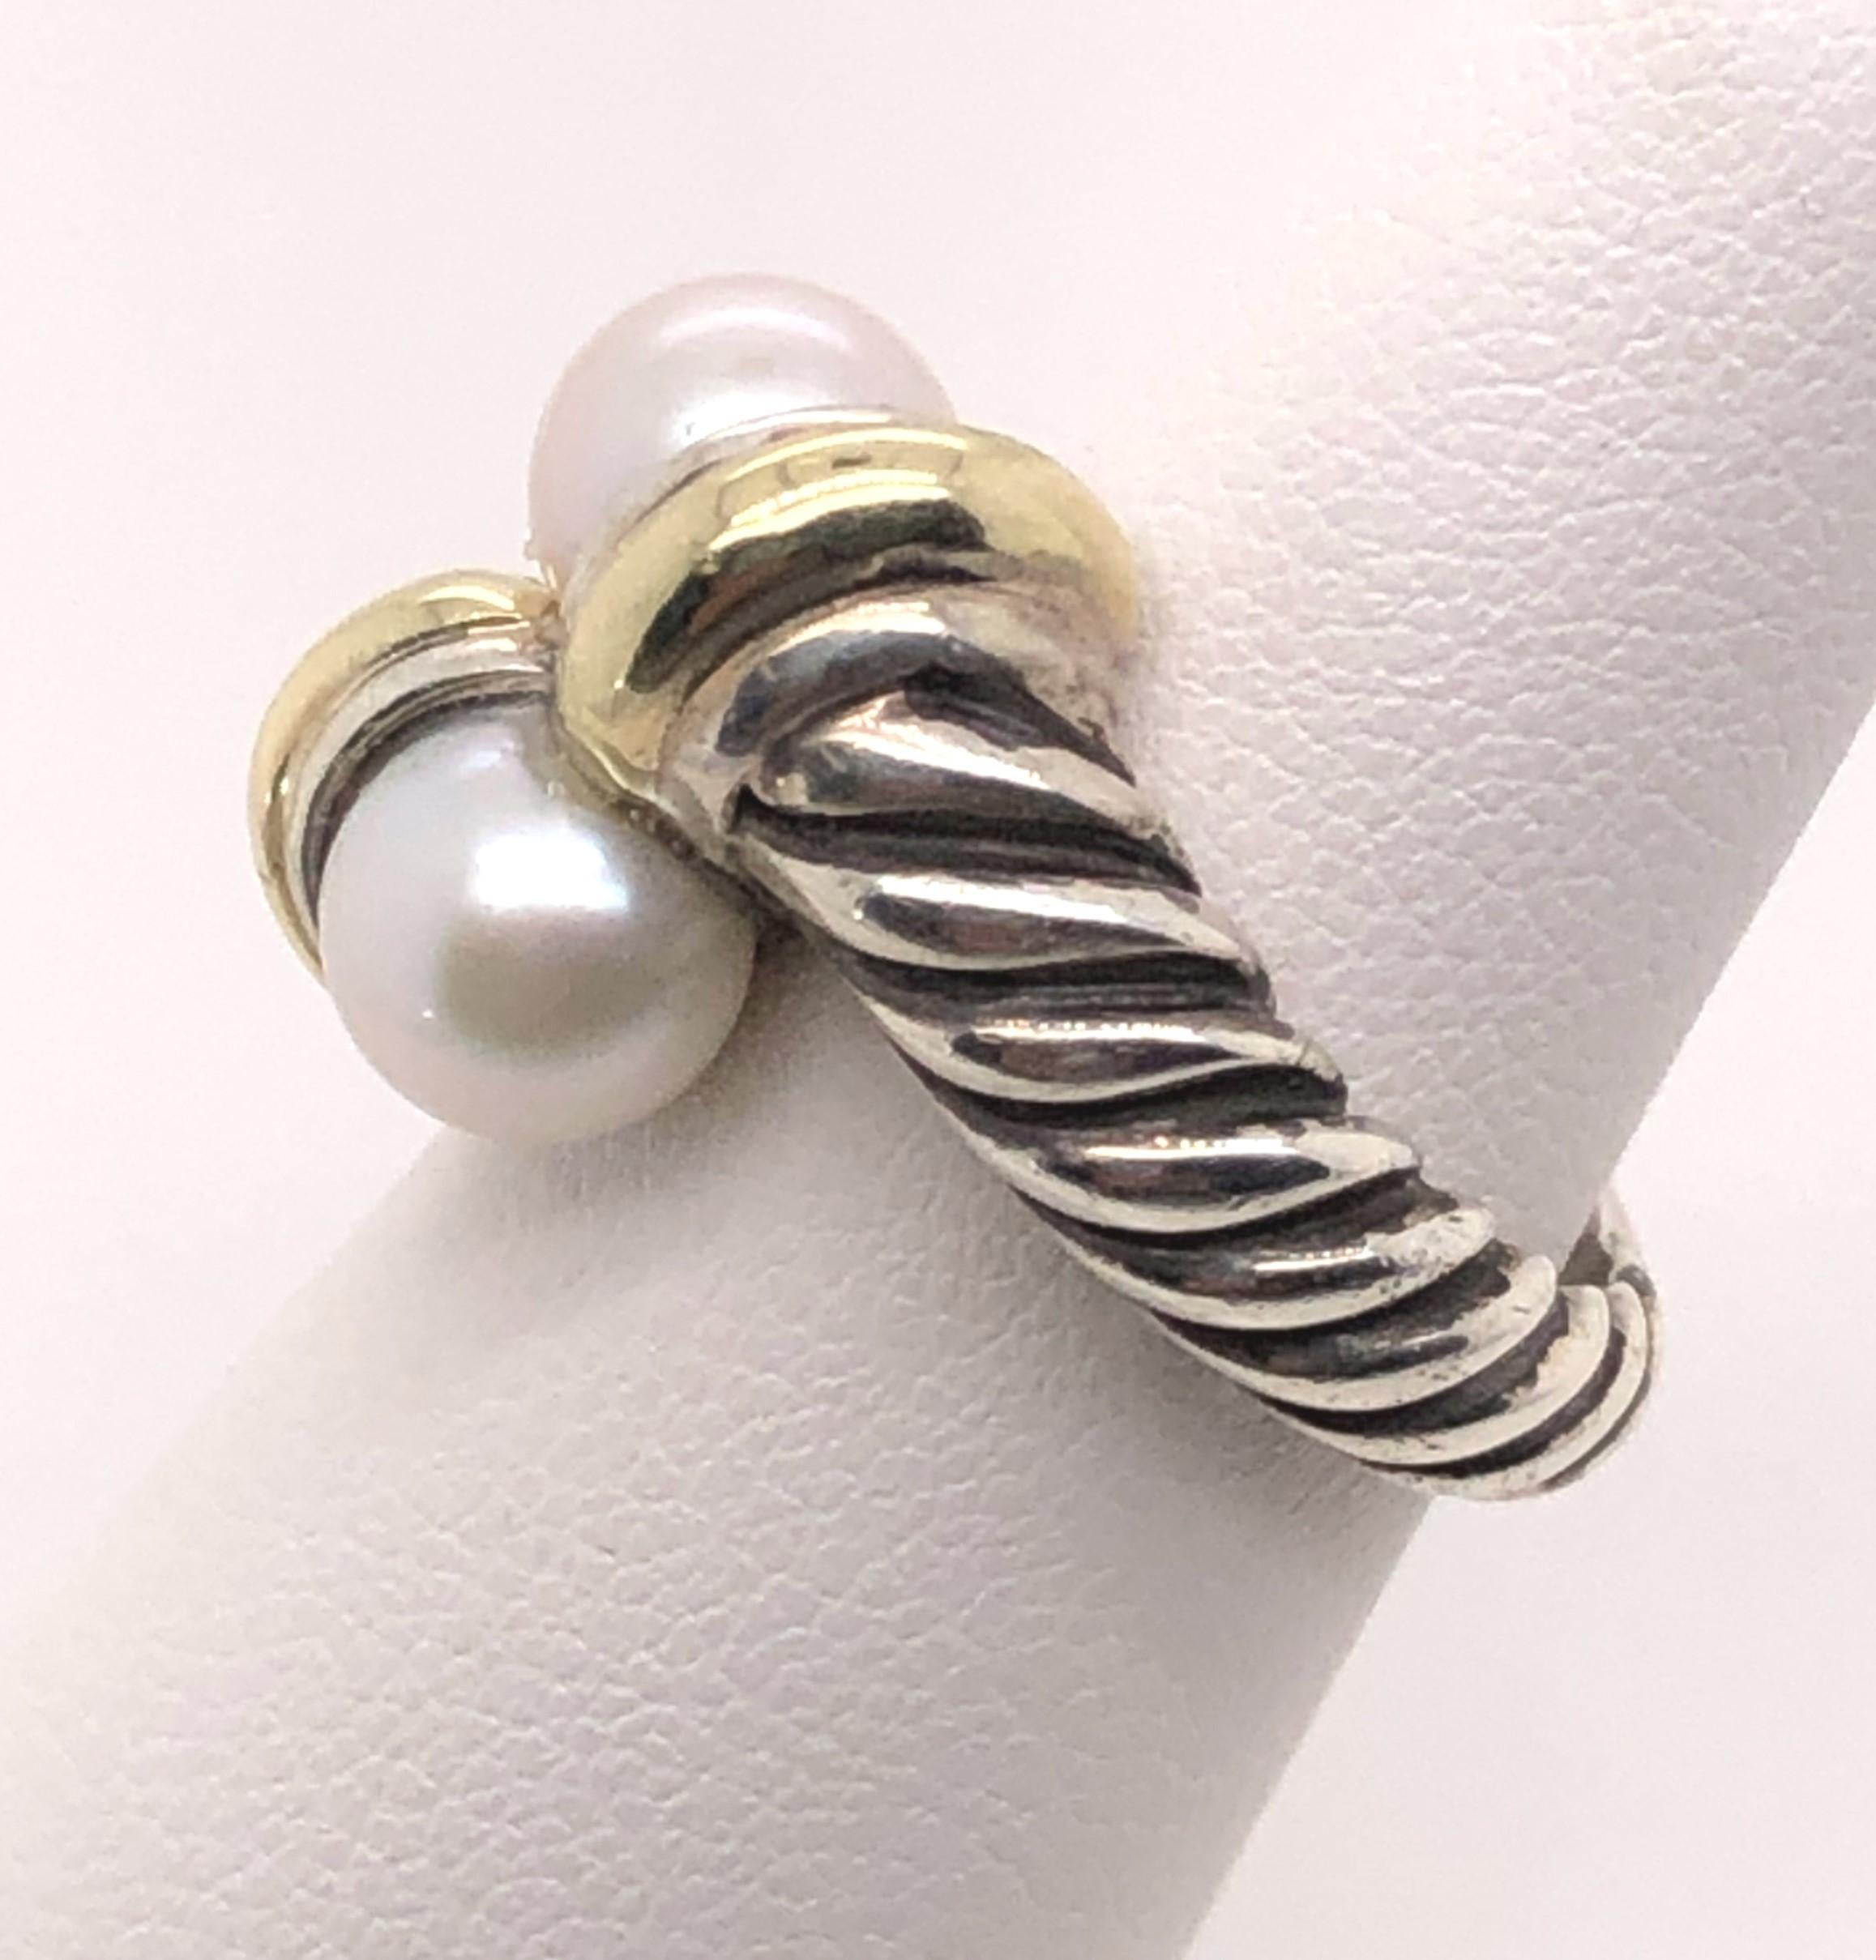 This sterling silver and 18kt yellow gold David Yurman ring contains two twin round white pearls set in a bypass style. The ring is a finger size 6 and can be sized to any finger size. The inside is stamped with David Yurman's DY stamp and 925/ 18k.